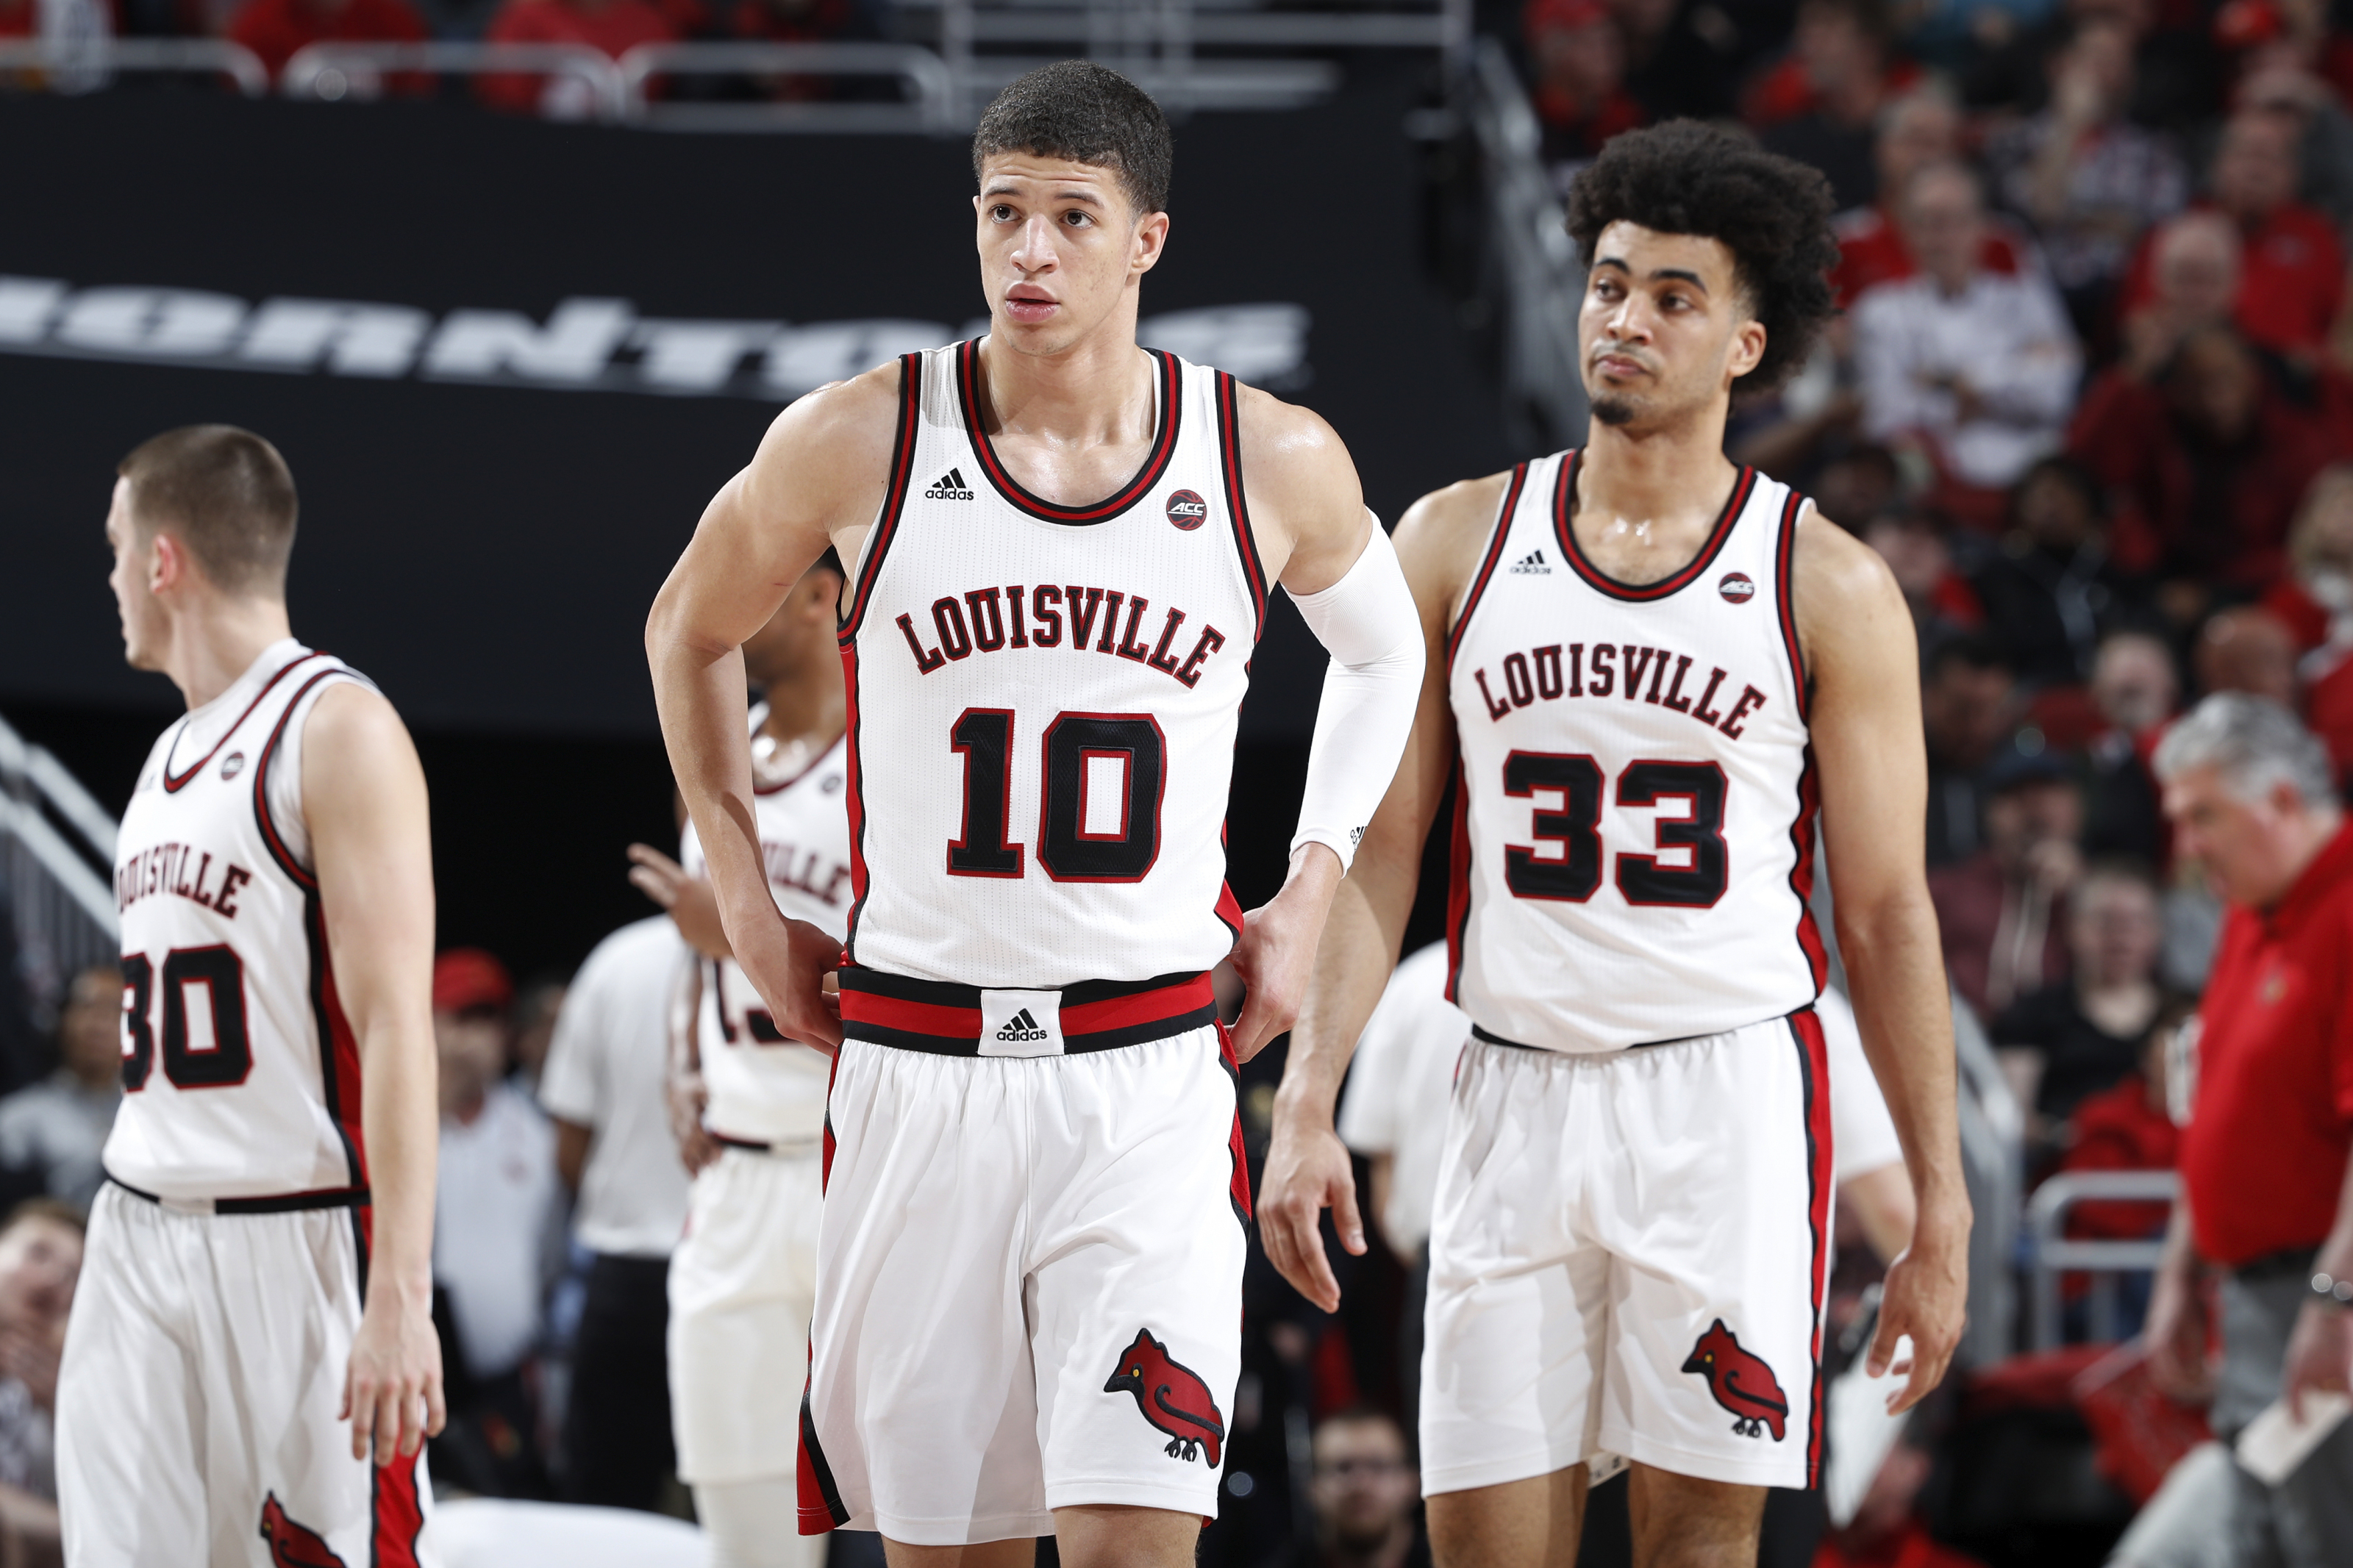 Louisville Basketball Will Have New Uniforms for 2012-2013 Season